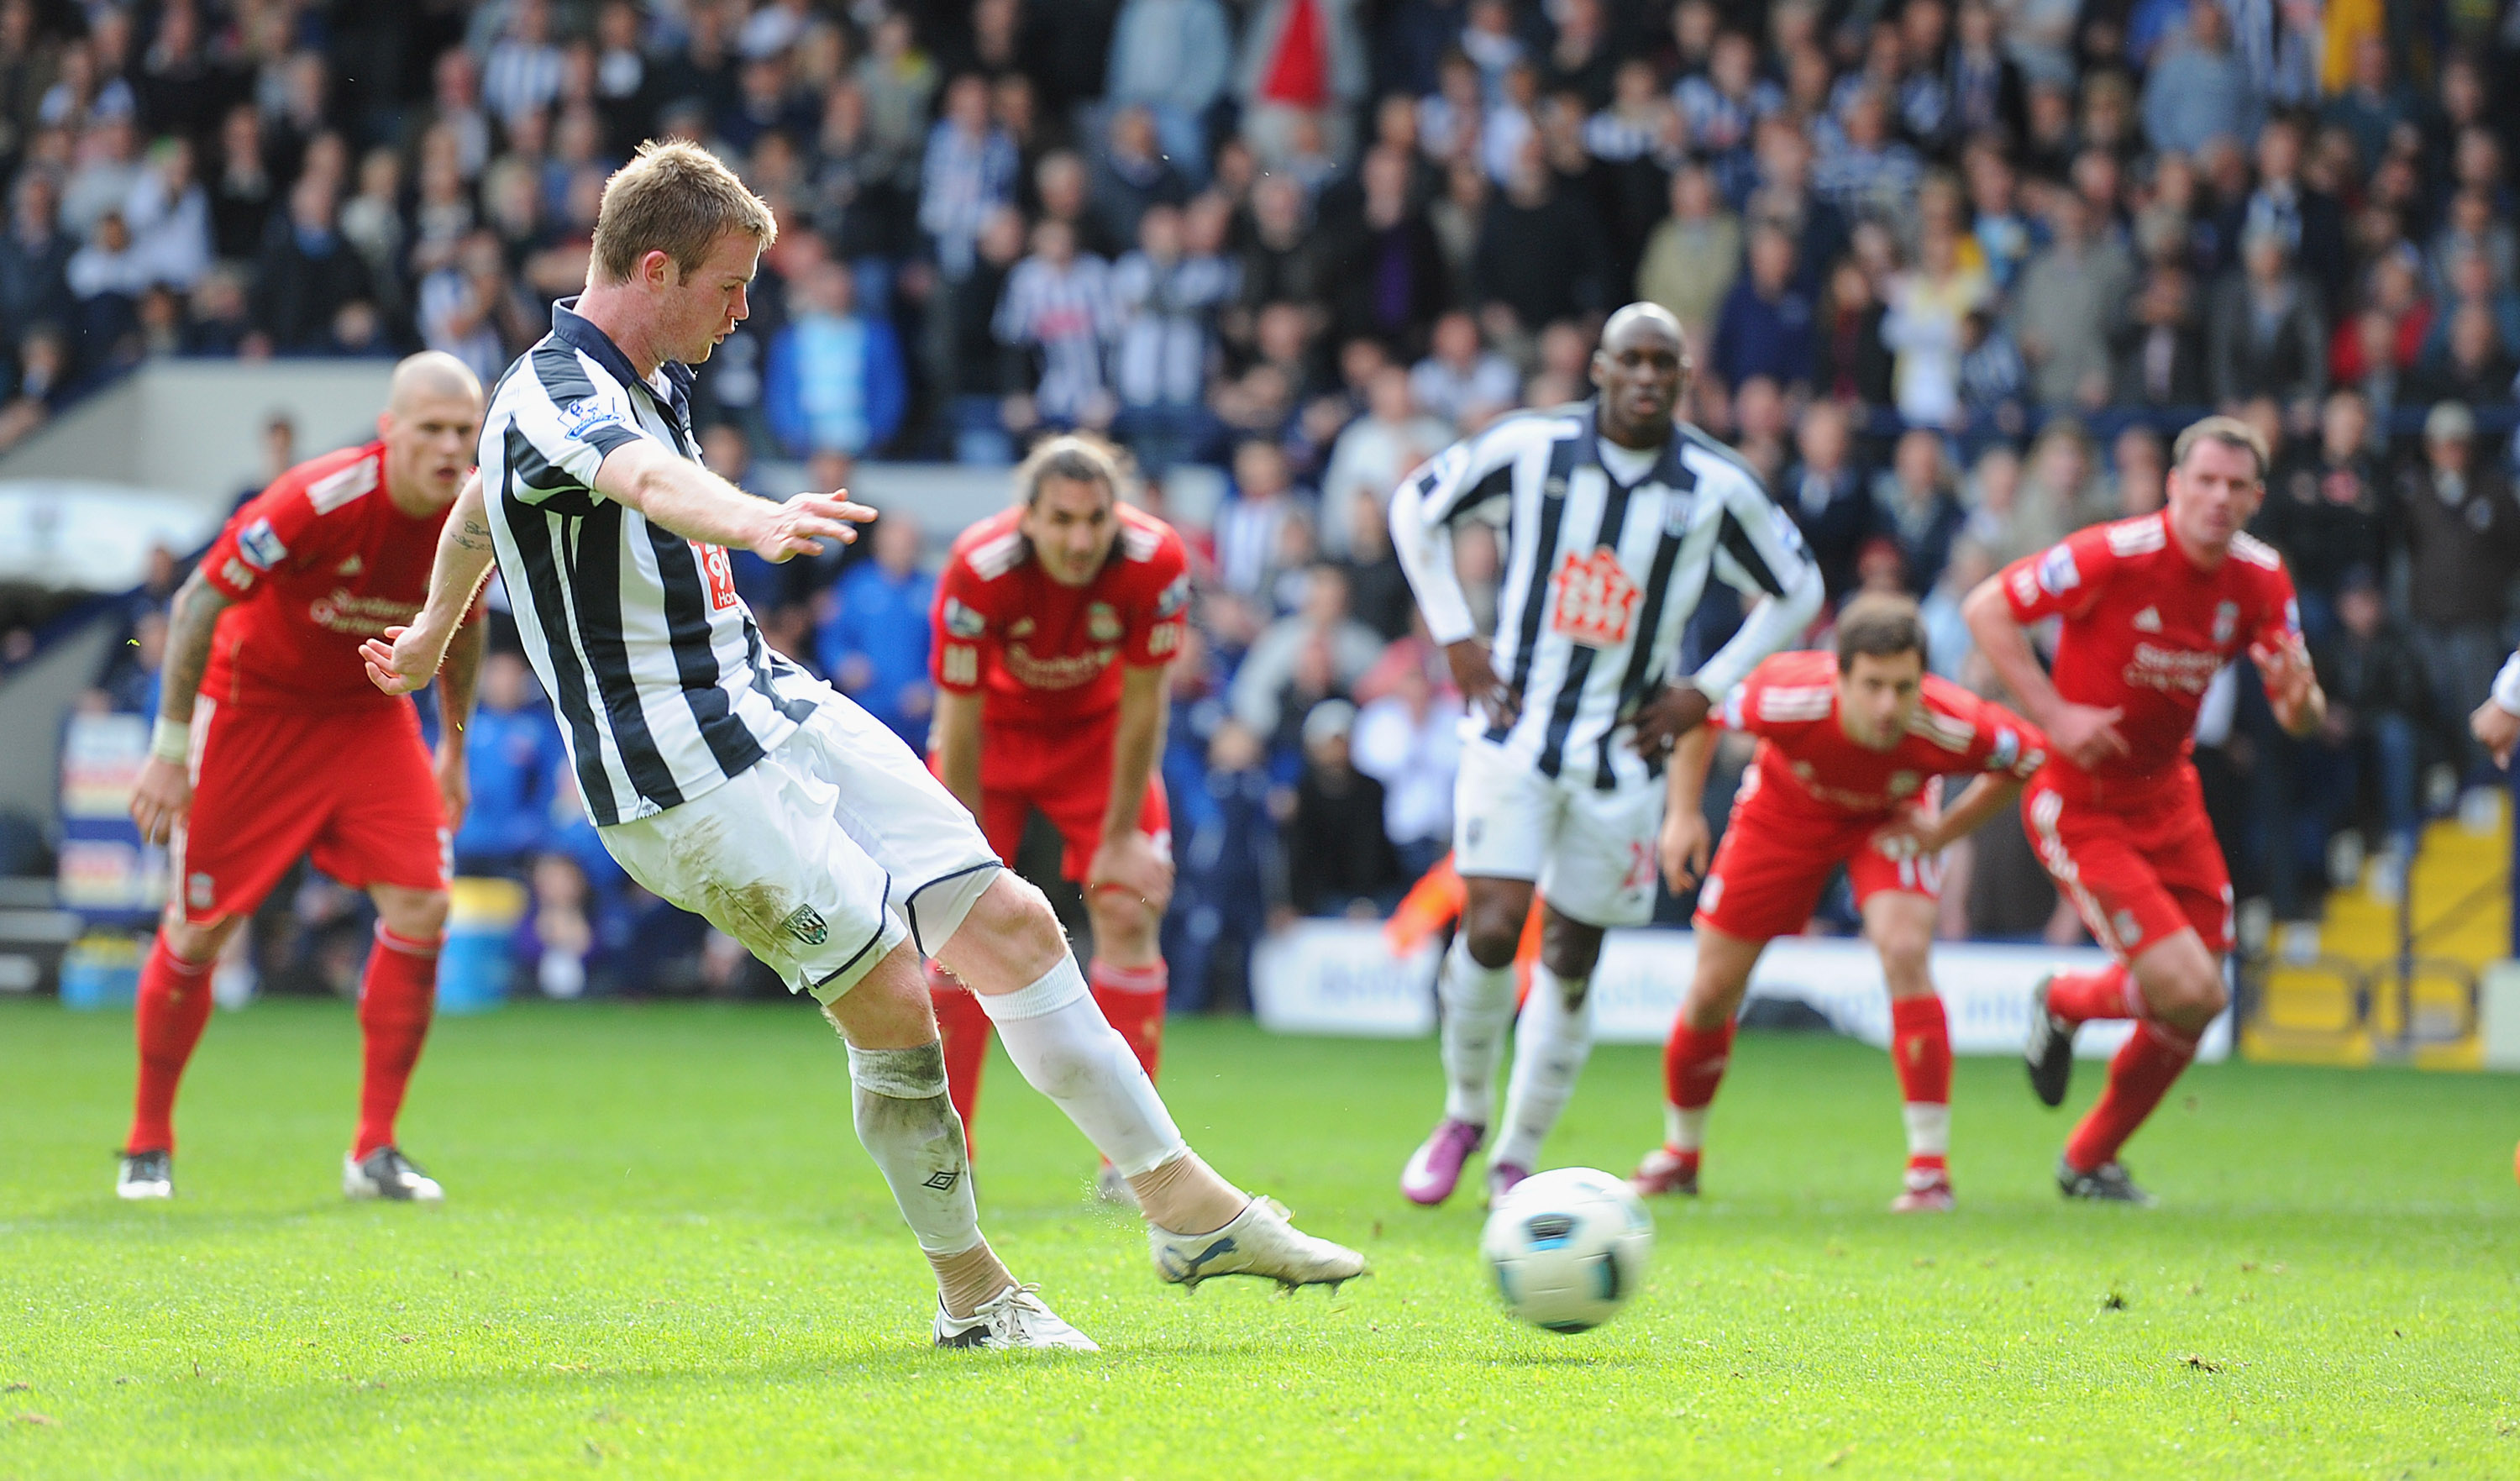 WEST BROMWICH, ENGLAND - APRIL 02:  Chris Brunt of West Brom scores to make it 2-1 from the spot during the Barclays Premier League match between West Bromwich Albion and Liverpool at The Hawthorns on April 2, 2011 in West Bromwich, England.  (Photo by Mi